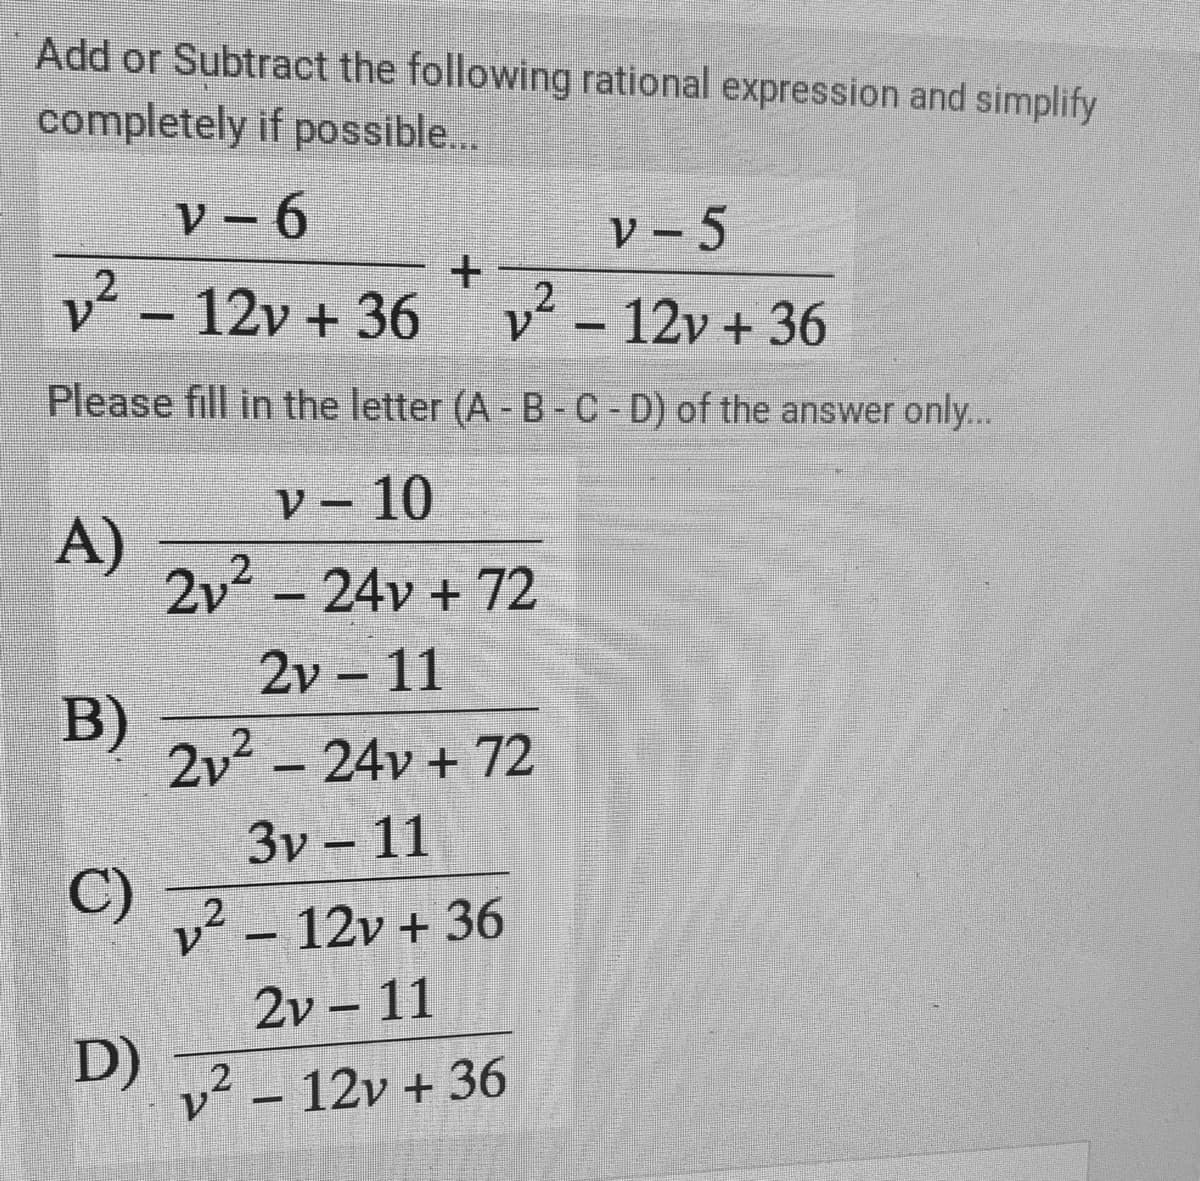 Add or Subtract the following rational expression and simplify
completely if possible...
V - 6
V – 5
v² - 12v + 36
v² - 12v + 36
2
V.
Please fill in the letter (A - B-C-D) of the answer only..
V – 10
A)
2v2
2-24v + 72
2v 11
B)
2v - 24v + 72
3v – 11
C)
v² – 12v + 36
.2
2v – 11
D)
v² – 12v + 36
12
